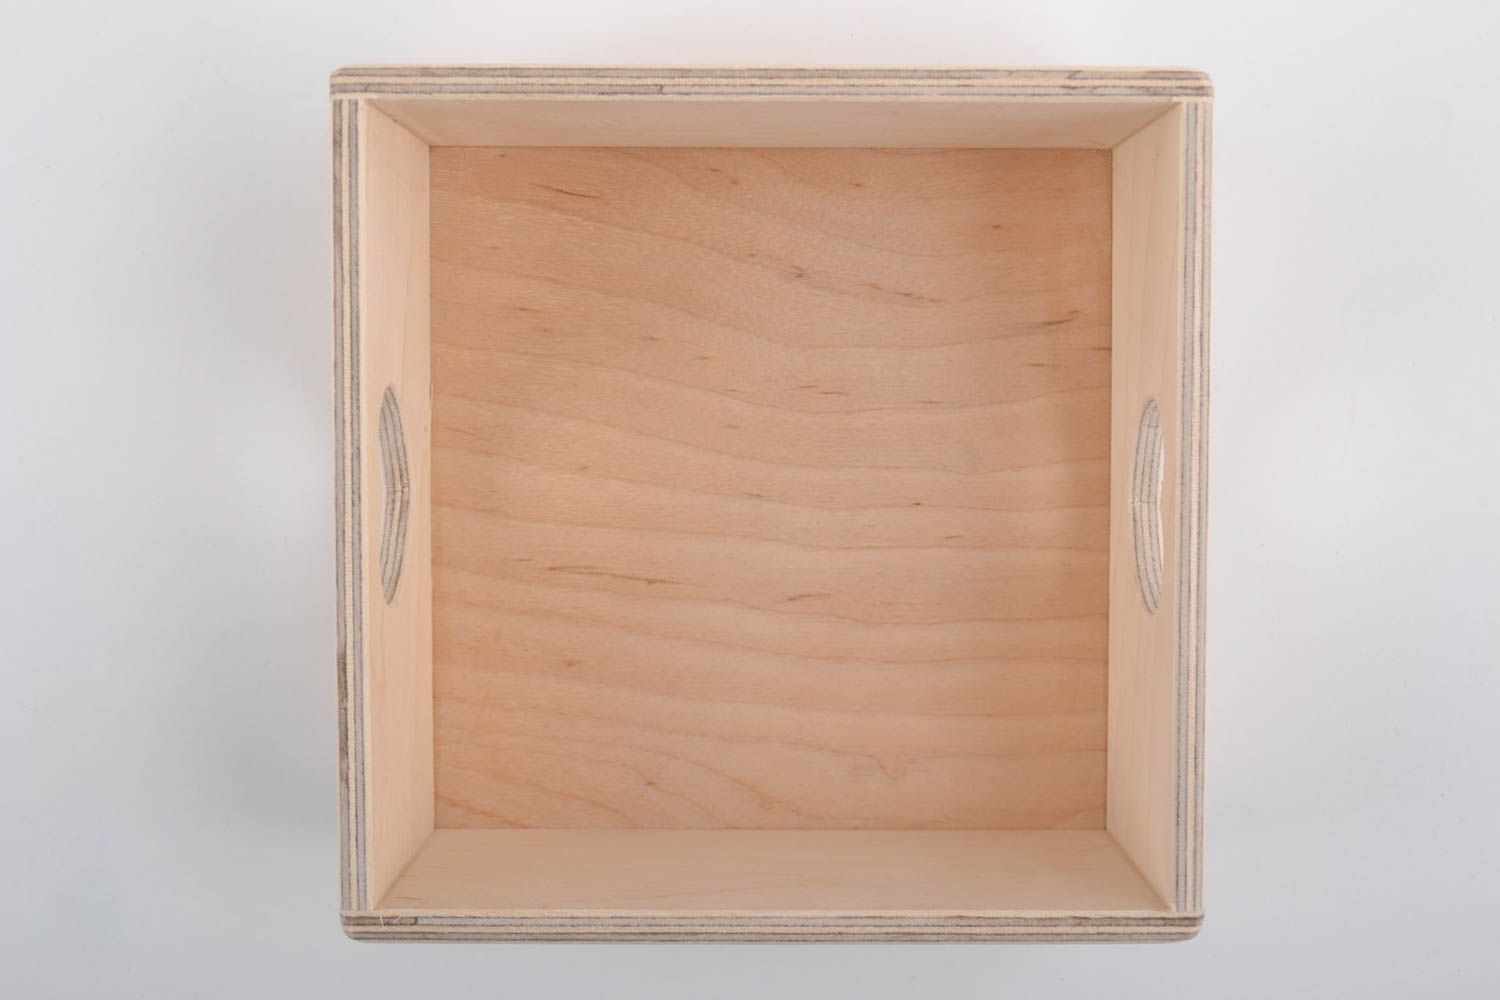 Handmade designer plywood craft blank for decoration square box without lid photo 4